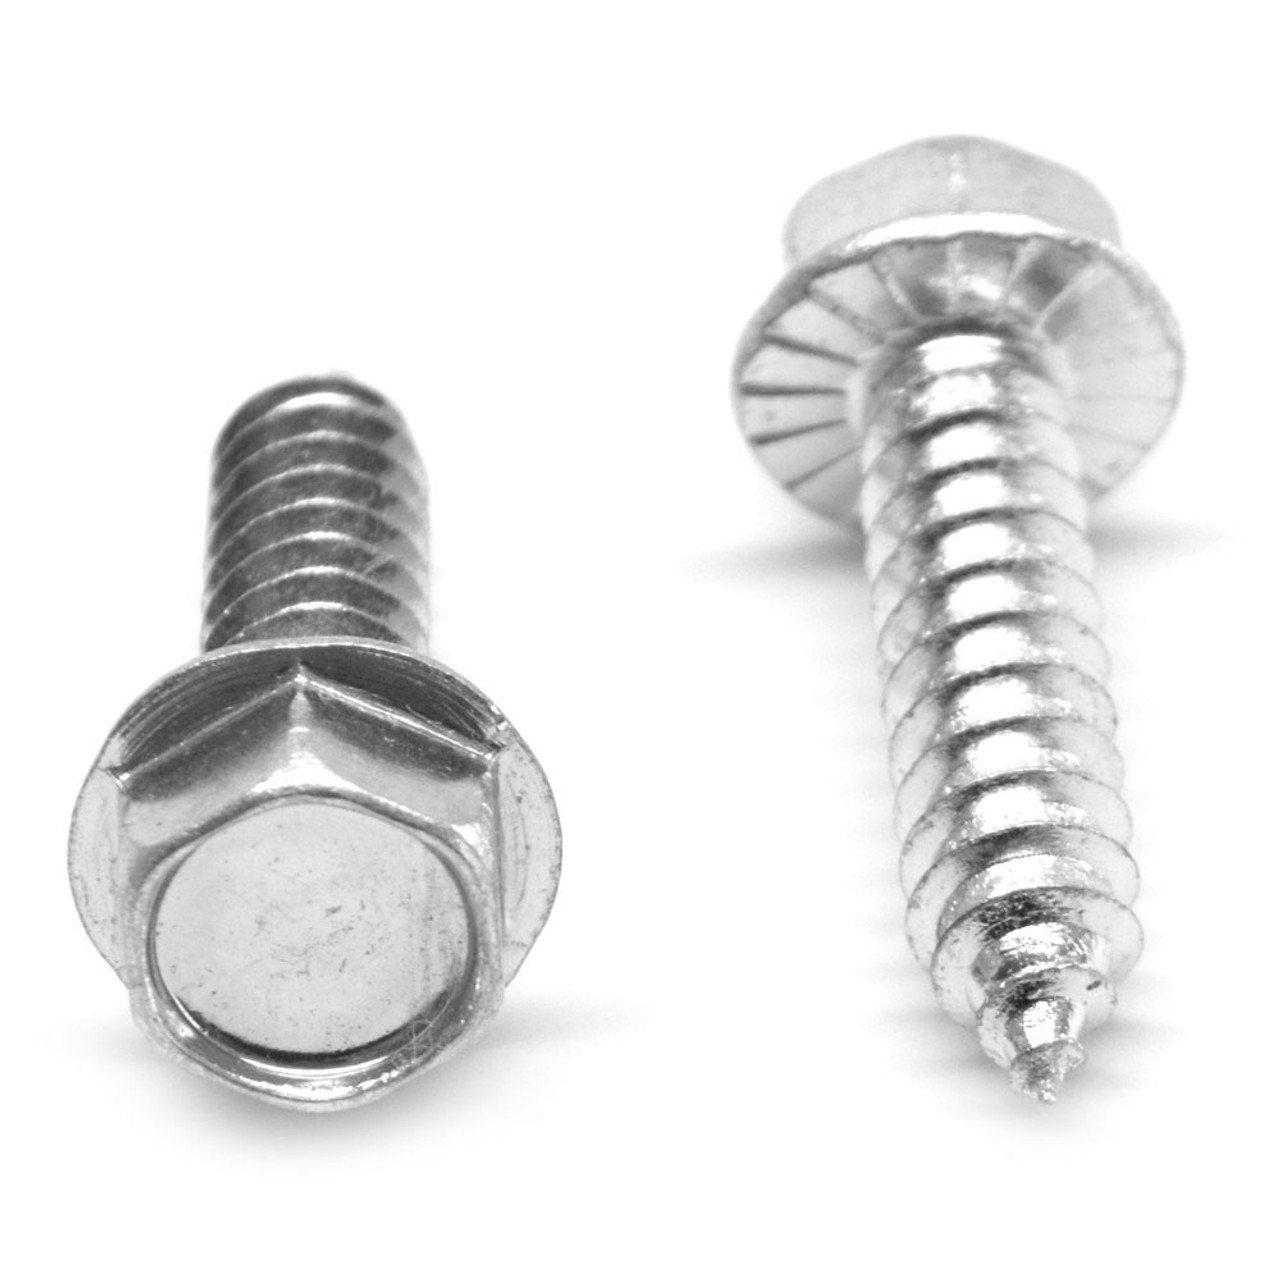 #10-16 x 5/8" (FT) Sheet Metal Screw Hex Washer Head with Serration Type AB Low Carbon Steel Zinc Plated